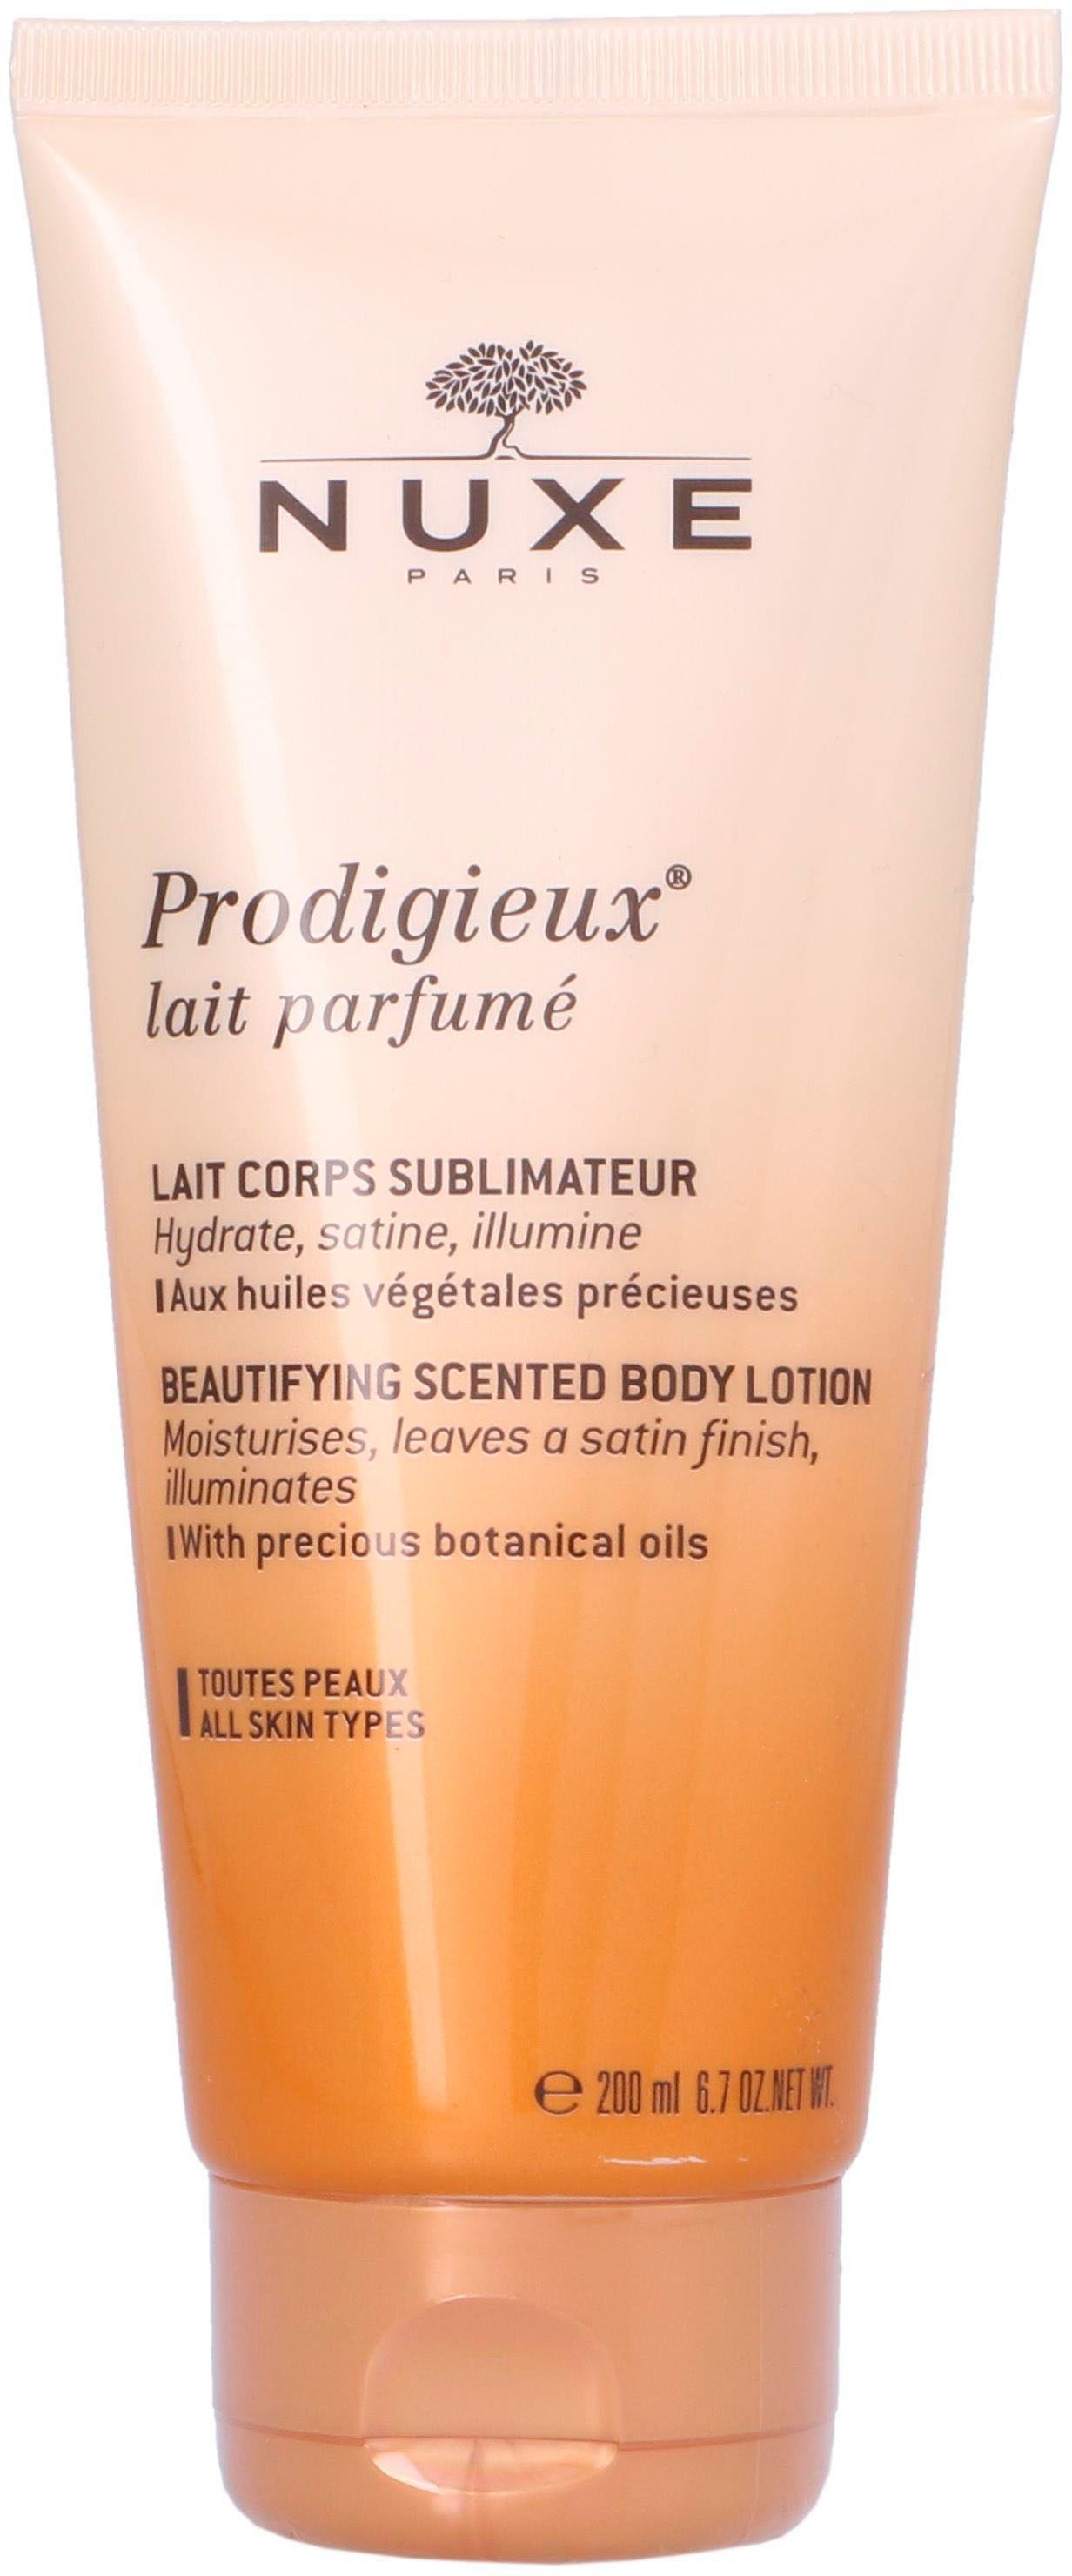 Nuxe Lotion Bodylotion Prodigieux Scented Lait Beautyfying Body